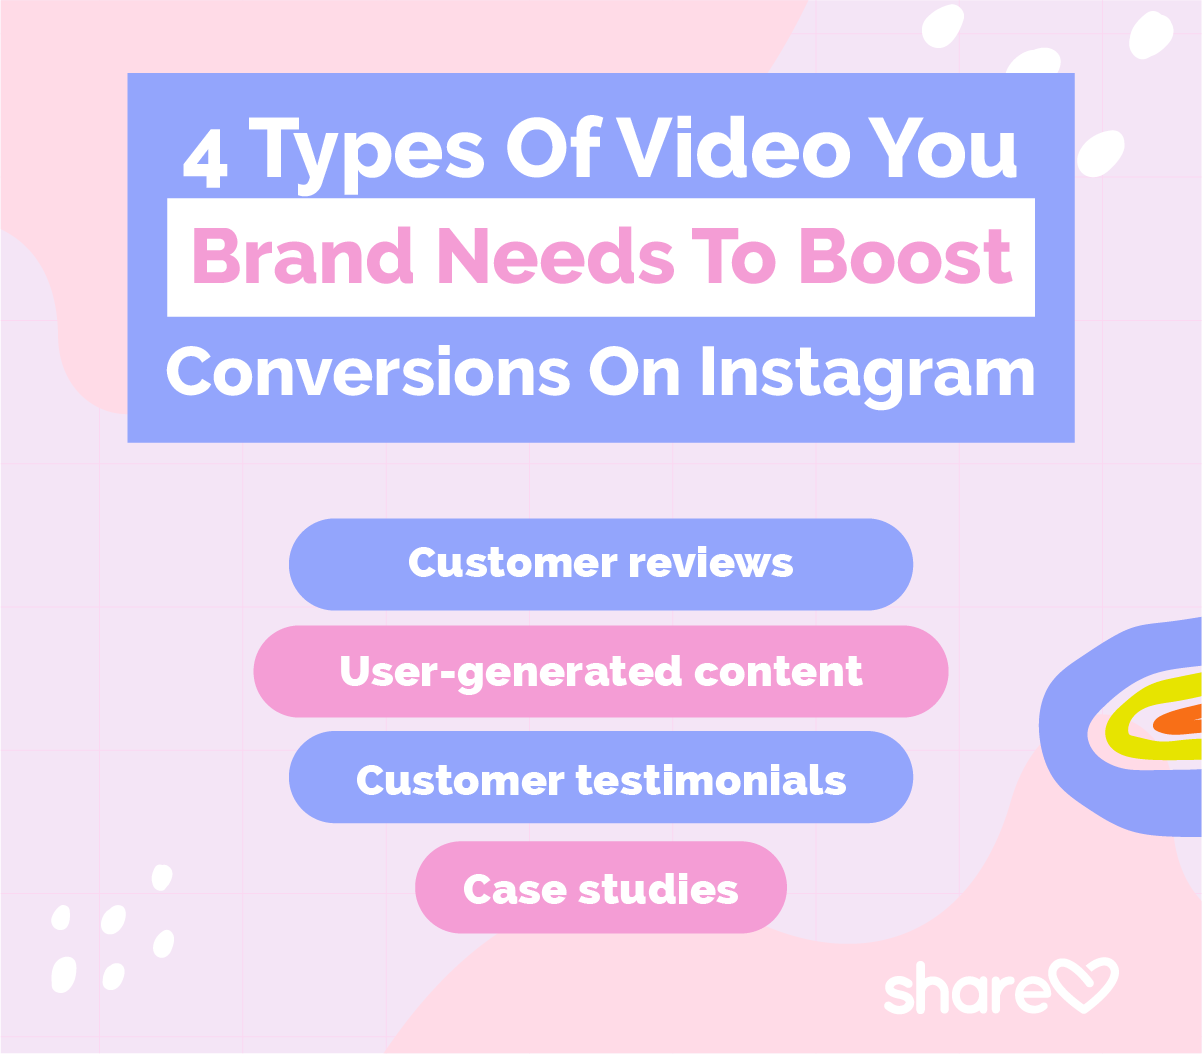 4 Types Of Video Your Brand Needs To Boost Conversions On Instagram